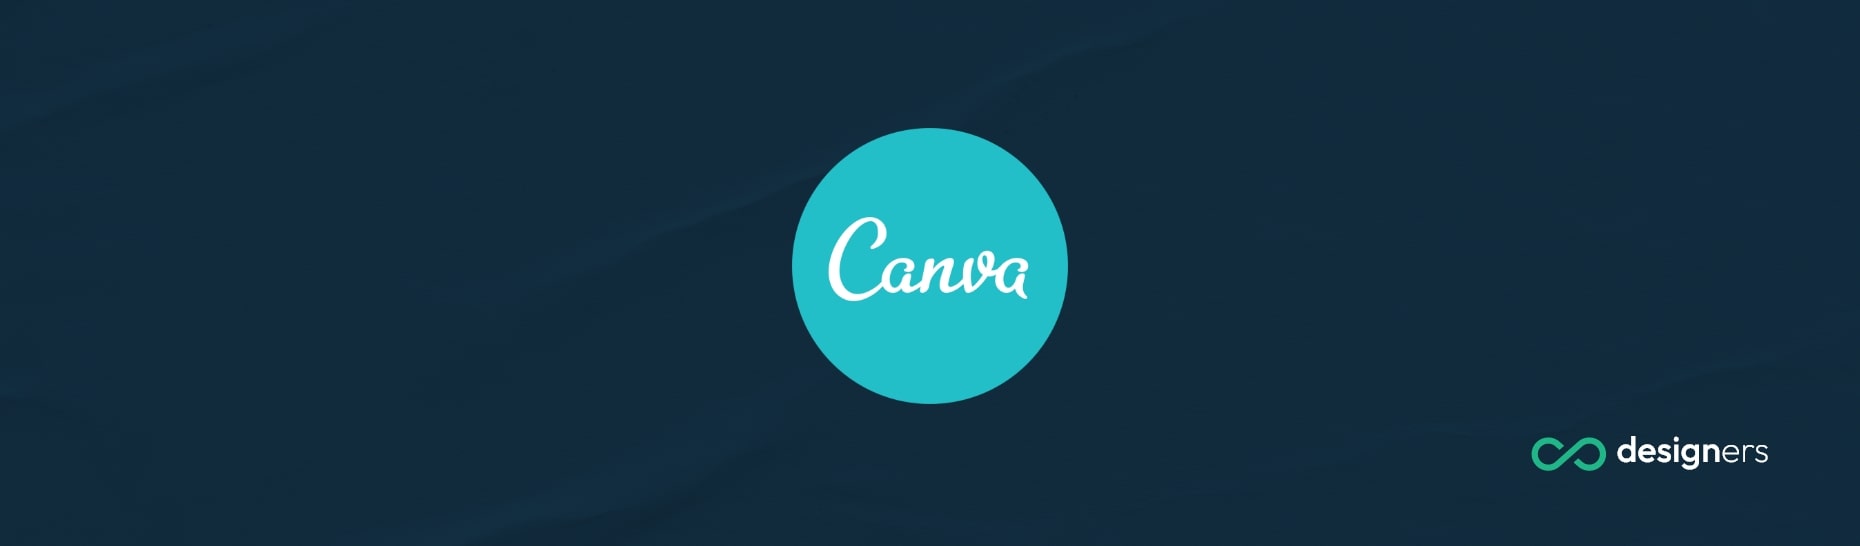 What Type of Software Is Canva?